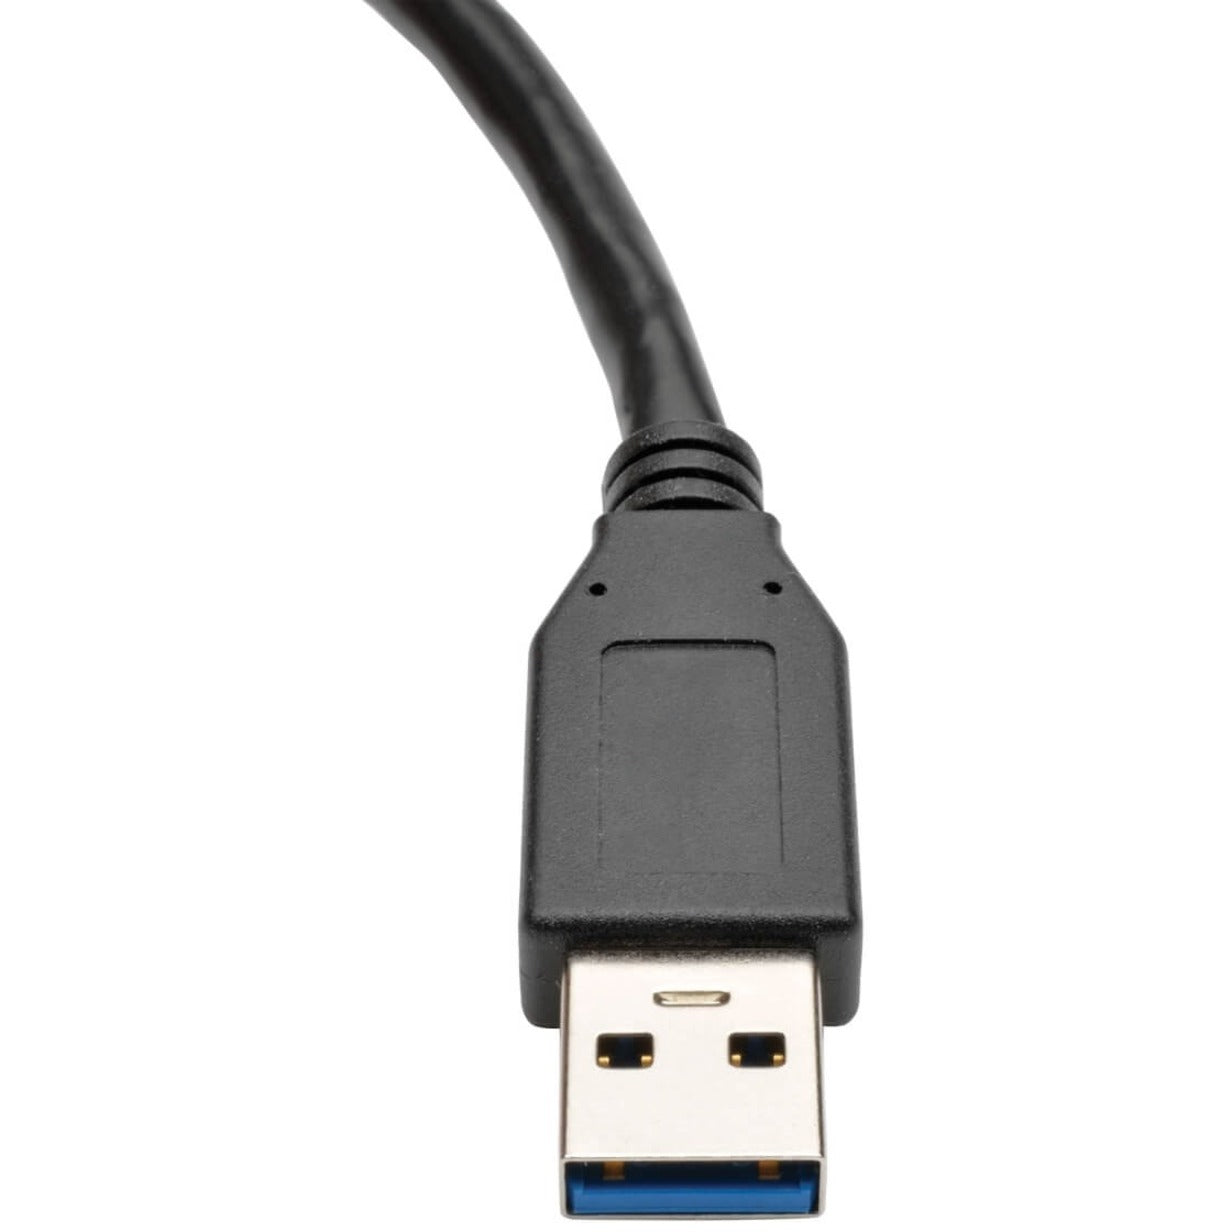 Tripp Lite U324-06N-BK USB 3.0 SuperSpeed Type-A Extension Cable (M/F), Black, 6 in.